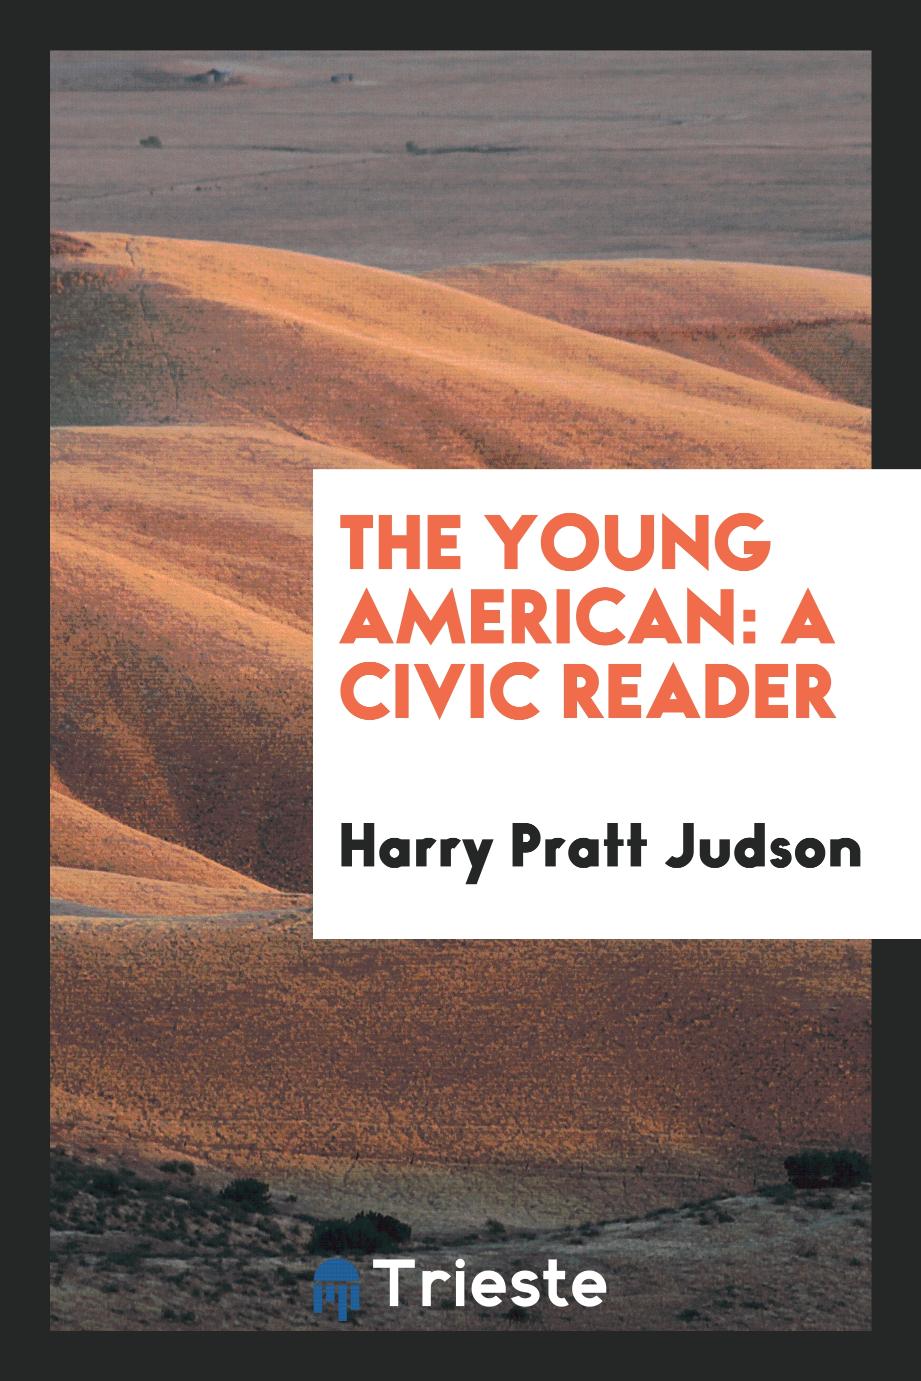 The young American: a civic reader